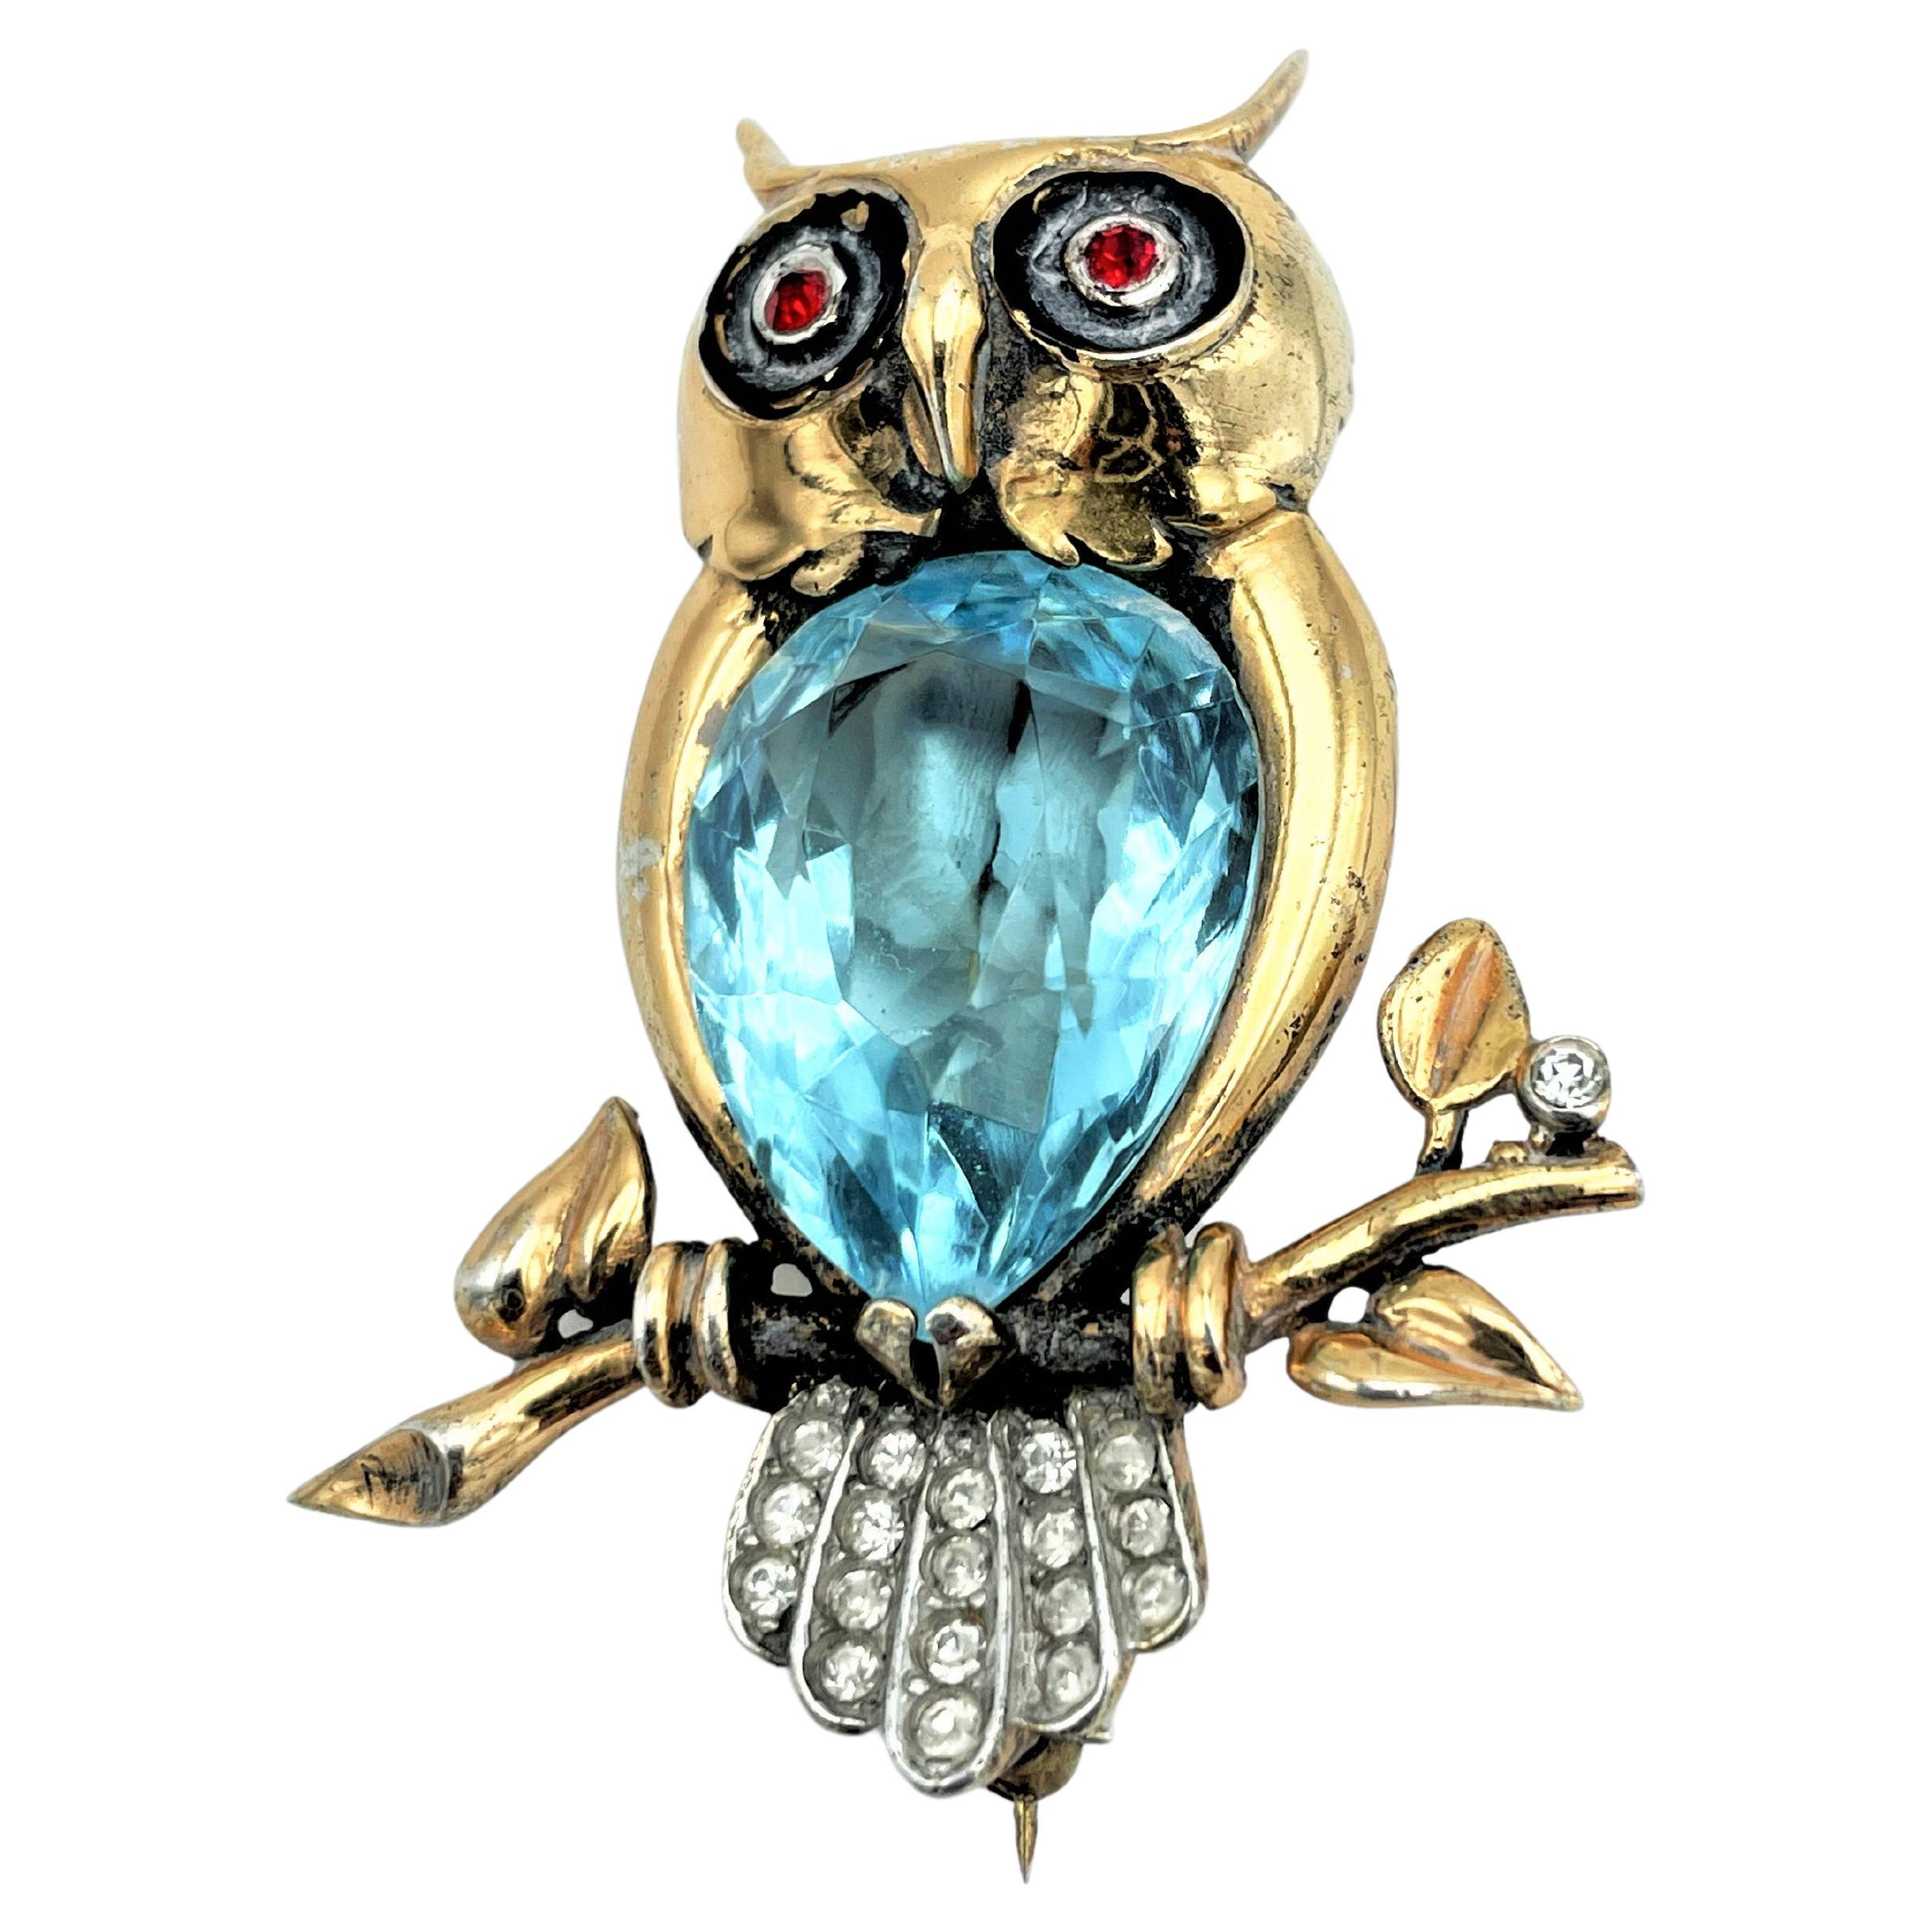 Vintage Owl Brooches - 23 For Sale on 1stDibs | the vintage owl photos,  antique owl brooch, owl pins brooches